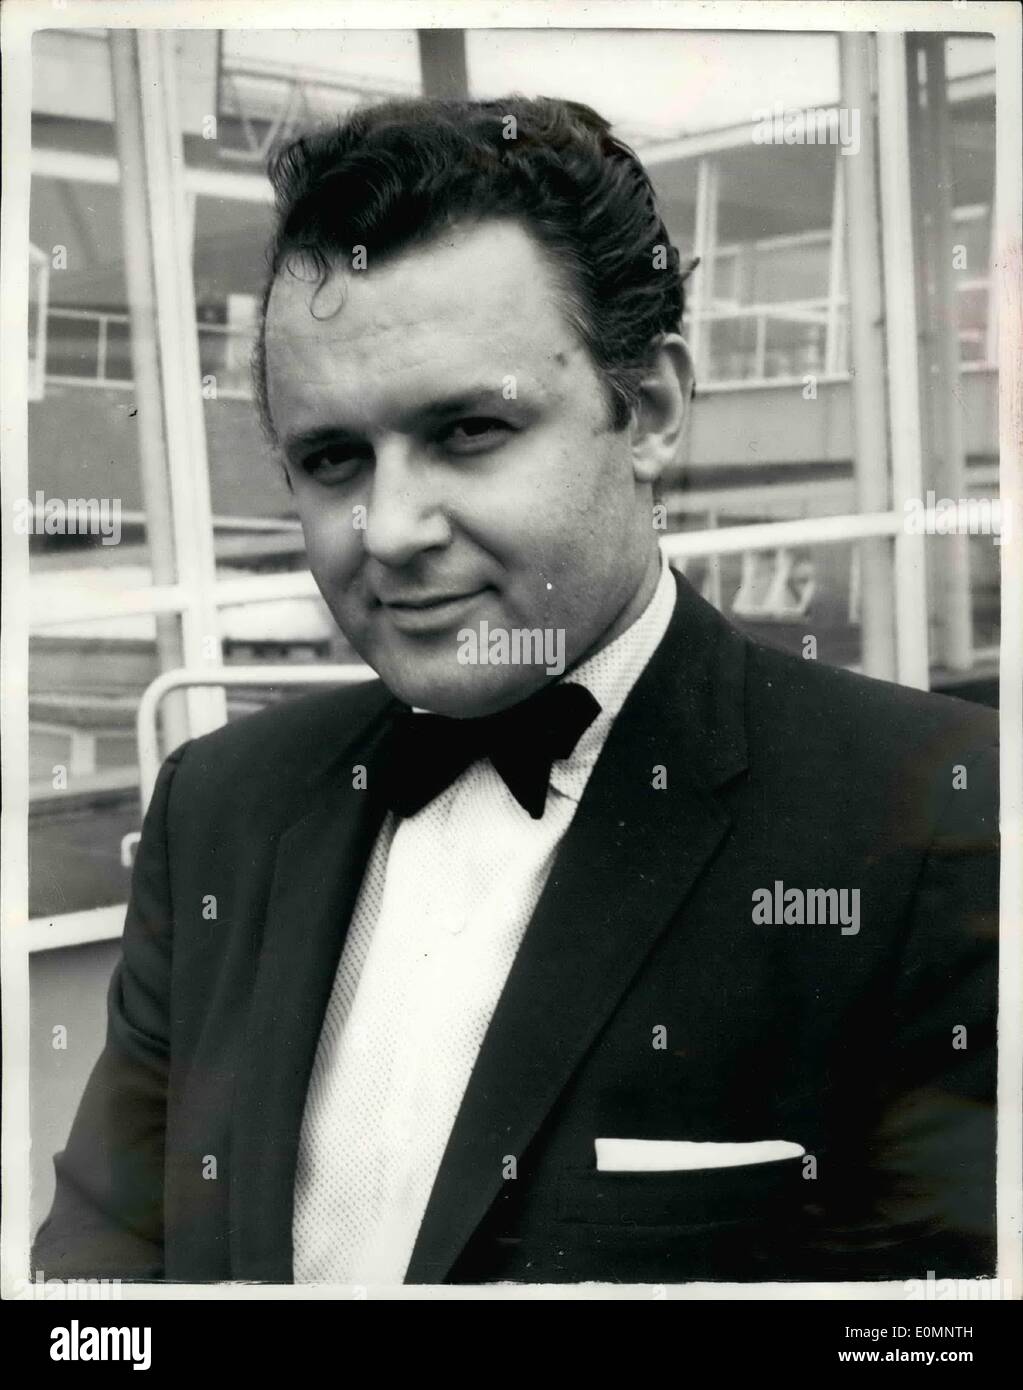 Apr. 04, 1956 - FILM STARS ARRIVES AT LONDON AIRPORT. ROD STEIGER. Hollywood ''tough guy'', Rod Steiger, arrived at London Airport today, on his holiday from filming. Rod Steiger, who is paying his first visit to Europe, has appeared in such films as ''On the Water Front'' - ''Jubal''- and ''The Harder They Fall''. Keystone Photo Shows:- Rod Steiger seen at London Airport on his arrival today. Stock Photo